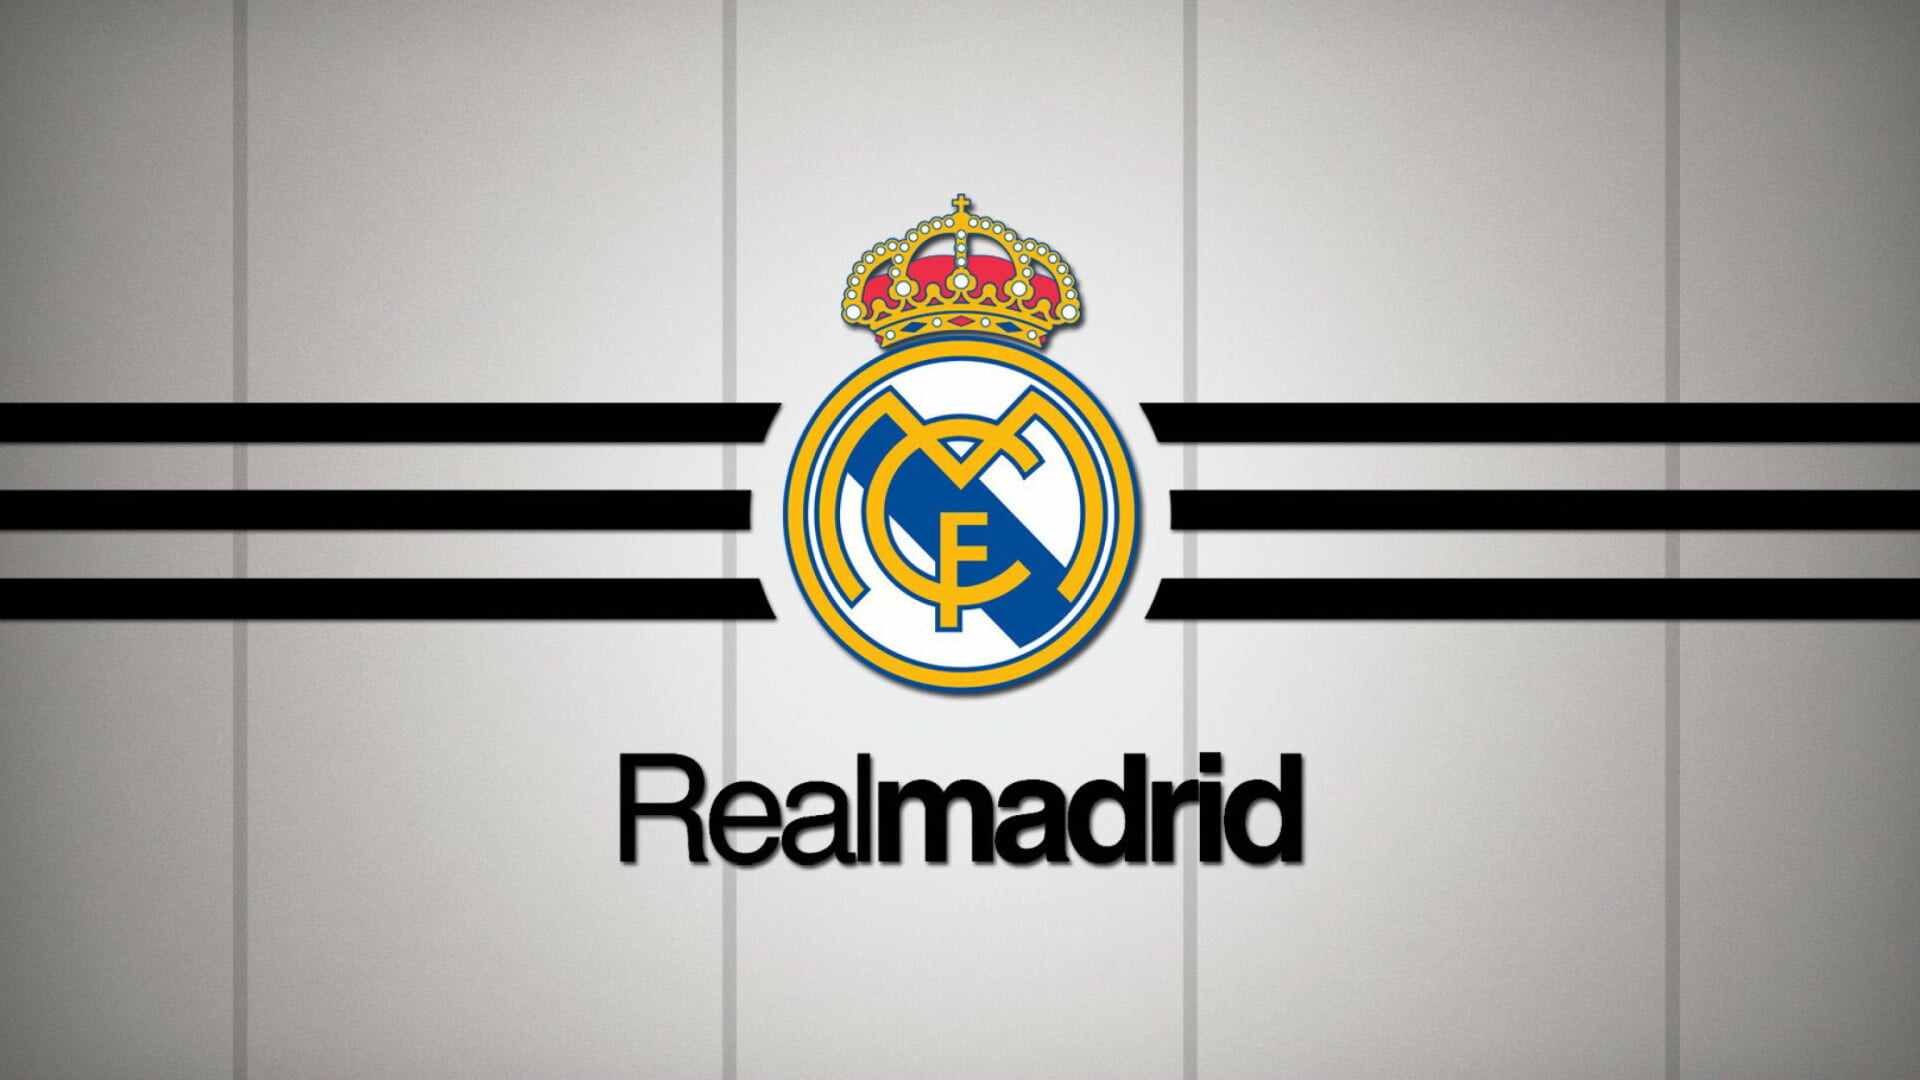 Real Madrid C.F., High-definition wallpapers, Football passion, Devoted followers, 1920x1080 Full HD Desktop